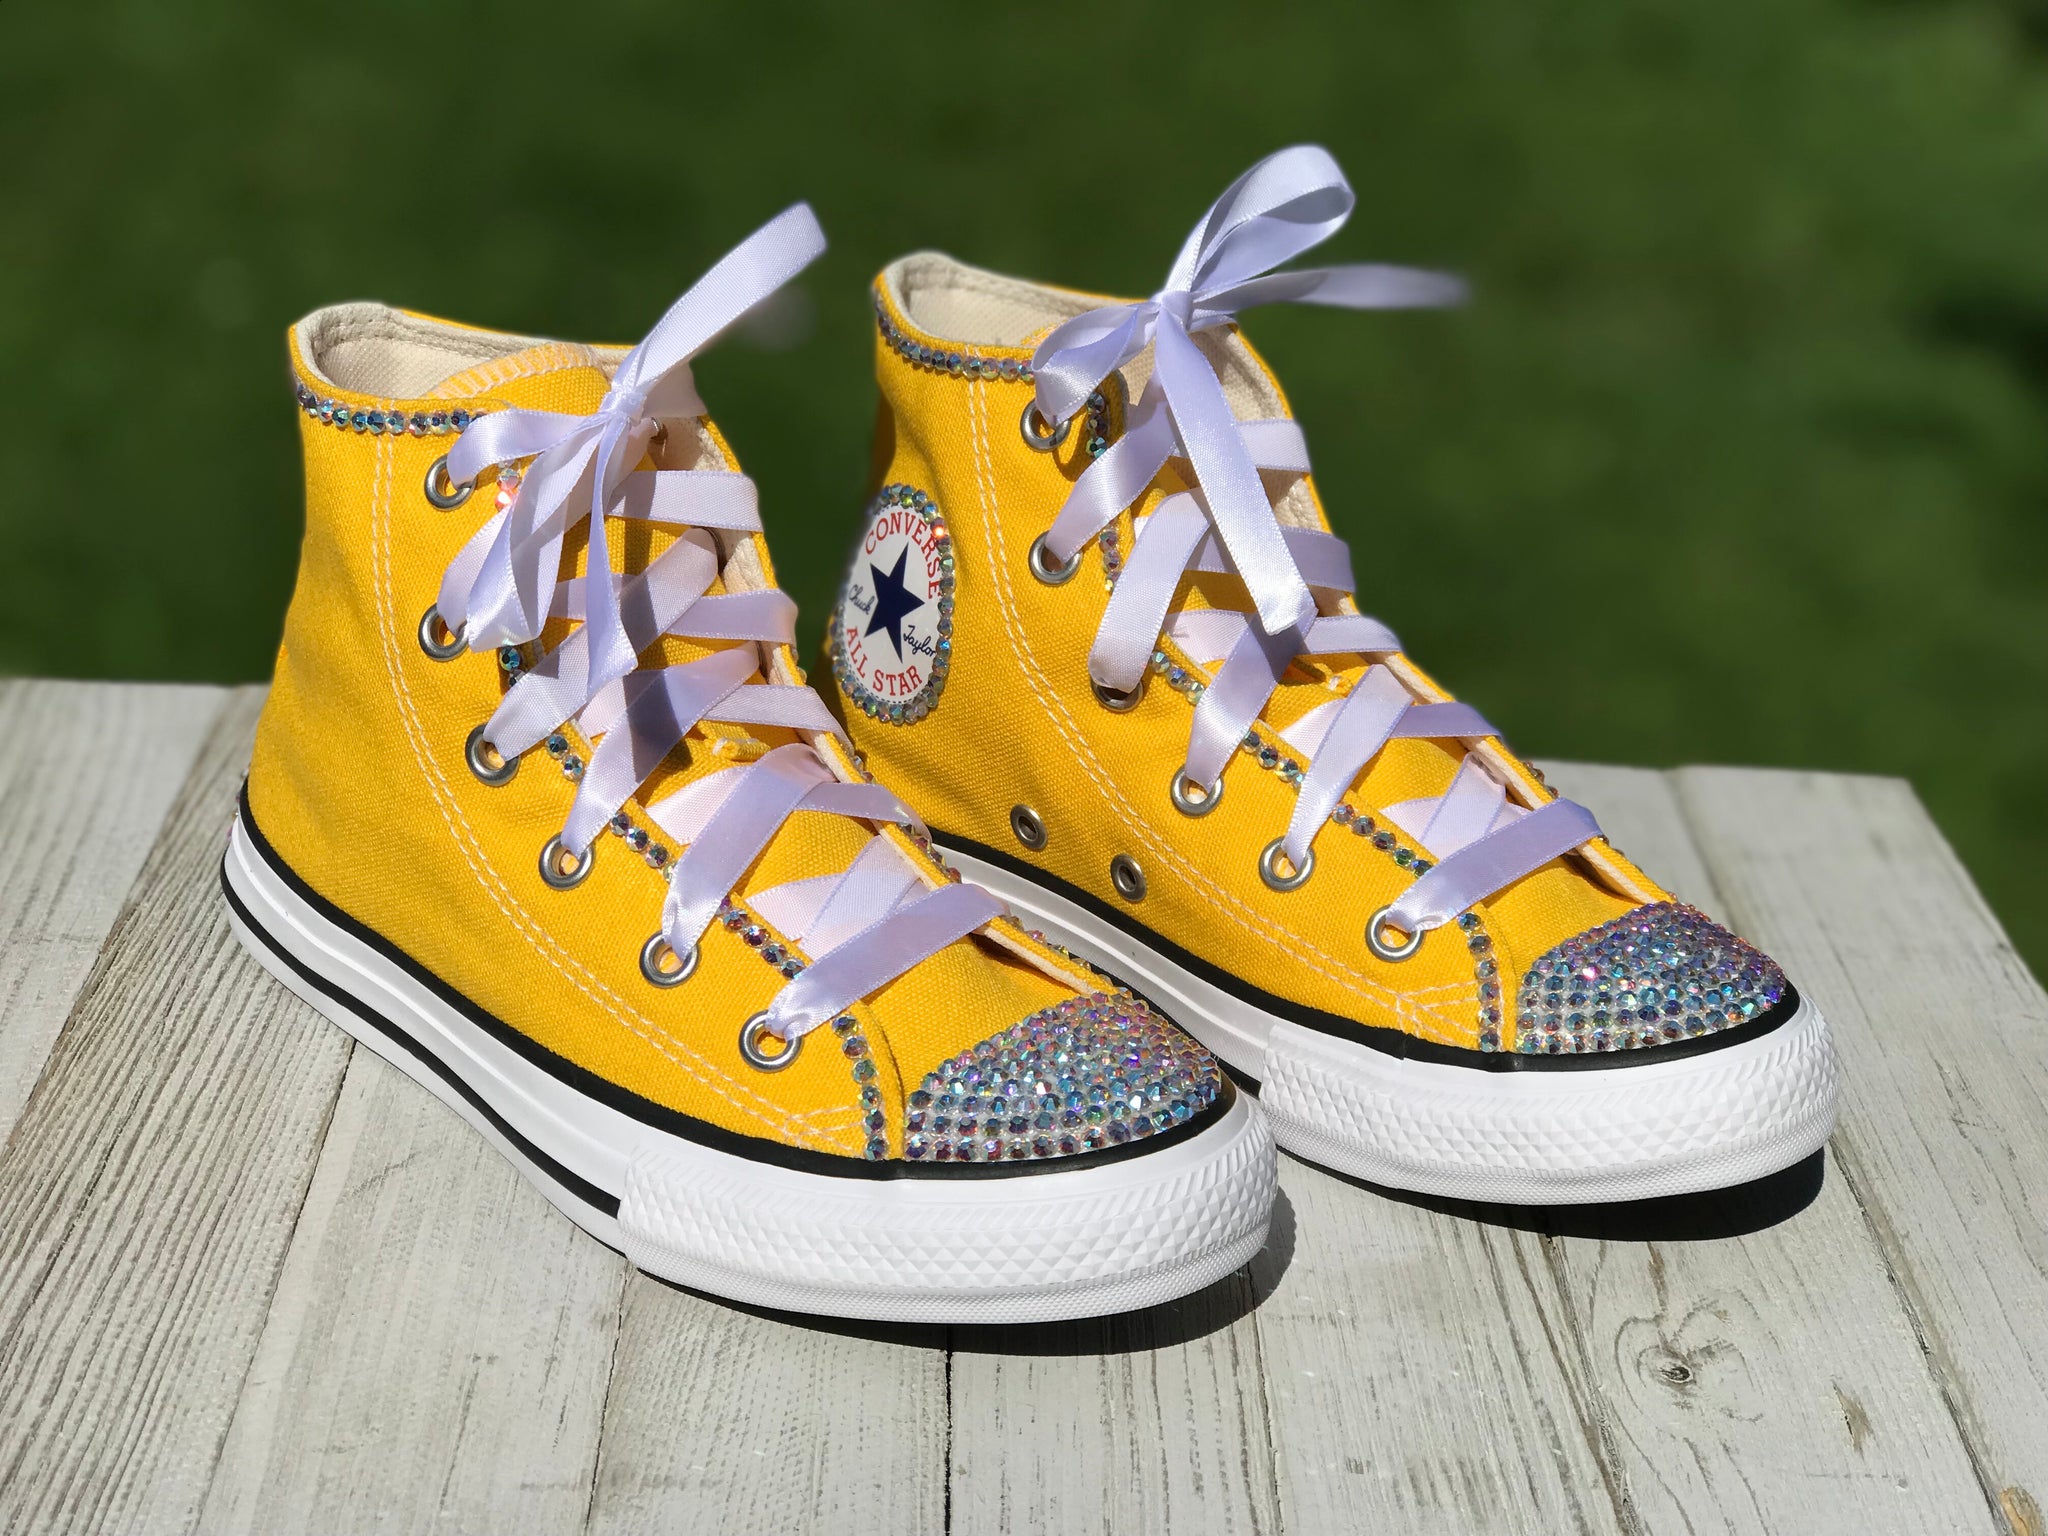 snyde fusion stå Yellow Blinged Converse Sneakers, Infants and Toddler Shoe Size 2-9 (H |  Little Ladybug Tutus